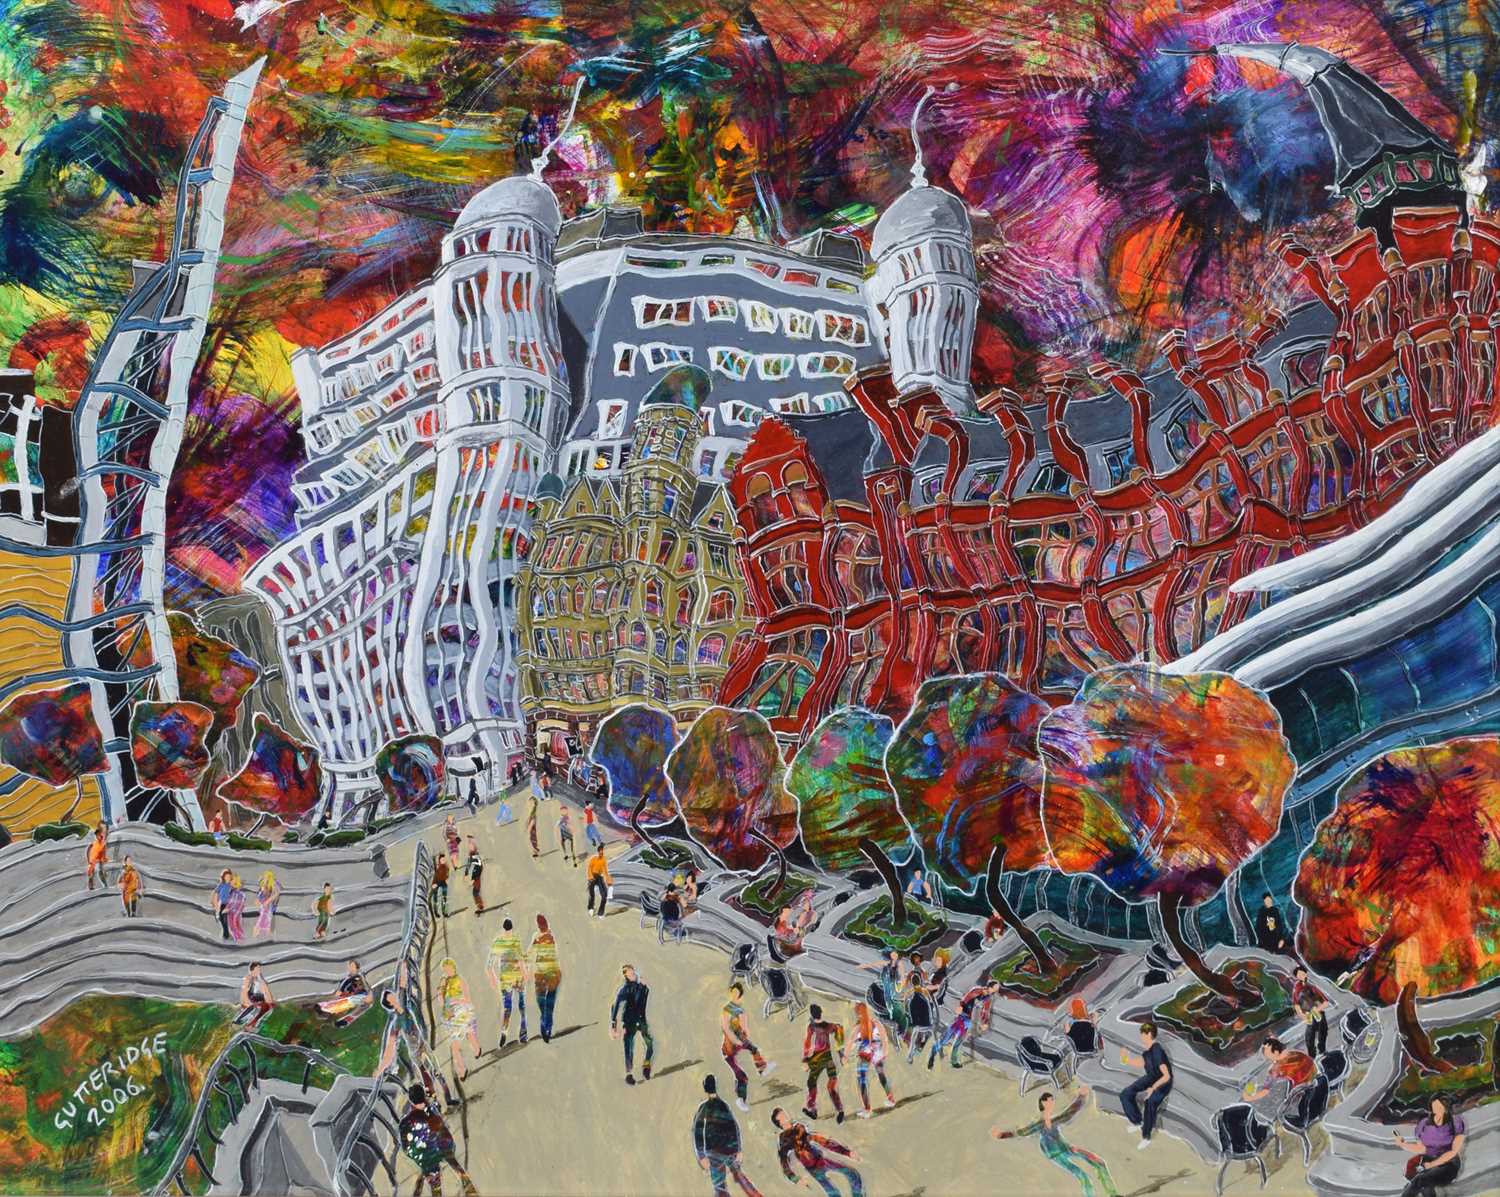 Lot 86 - Michael Gutteridge, "Great Northern Square, Manchester", acrylic on board.